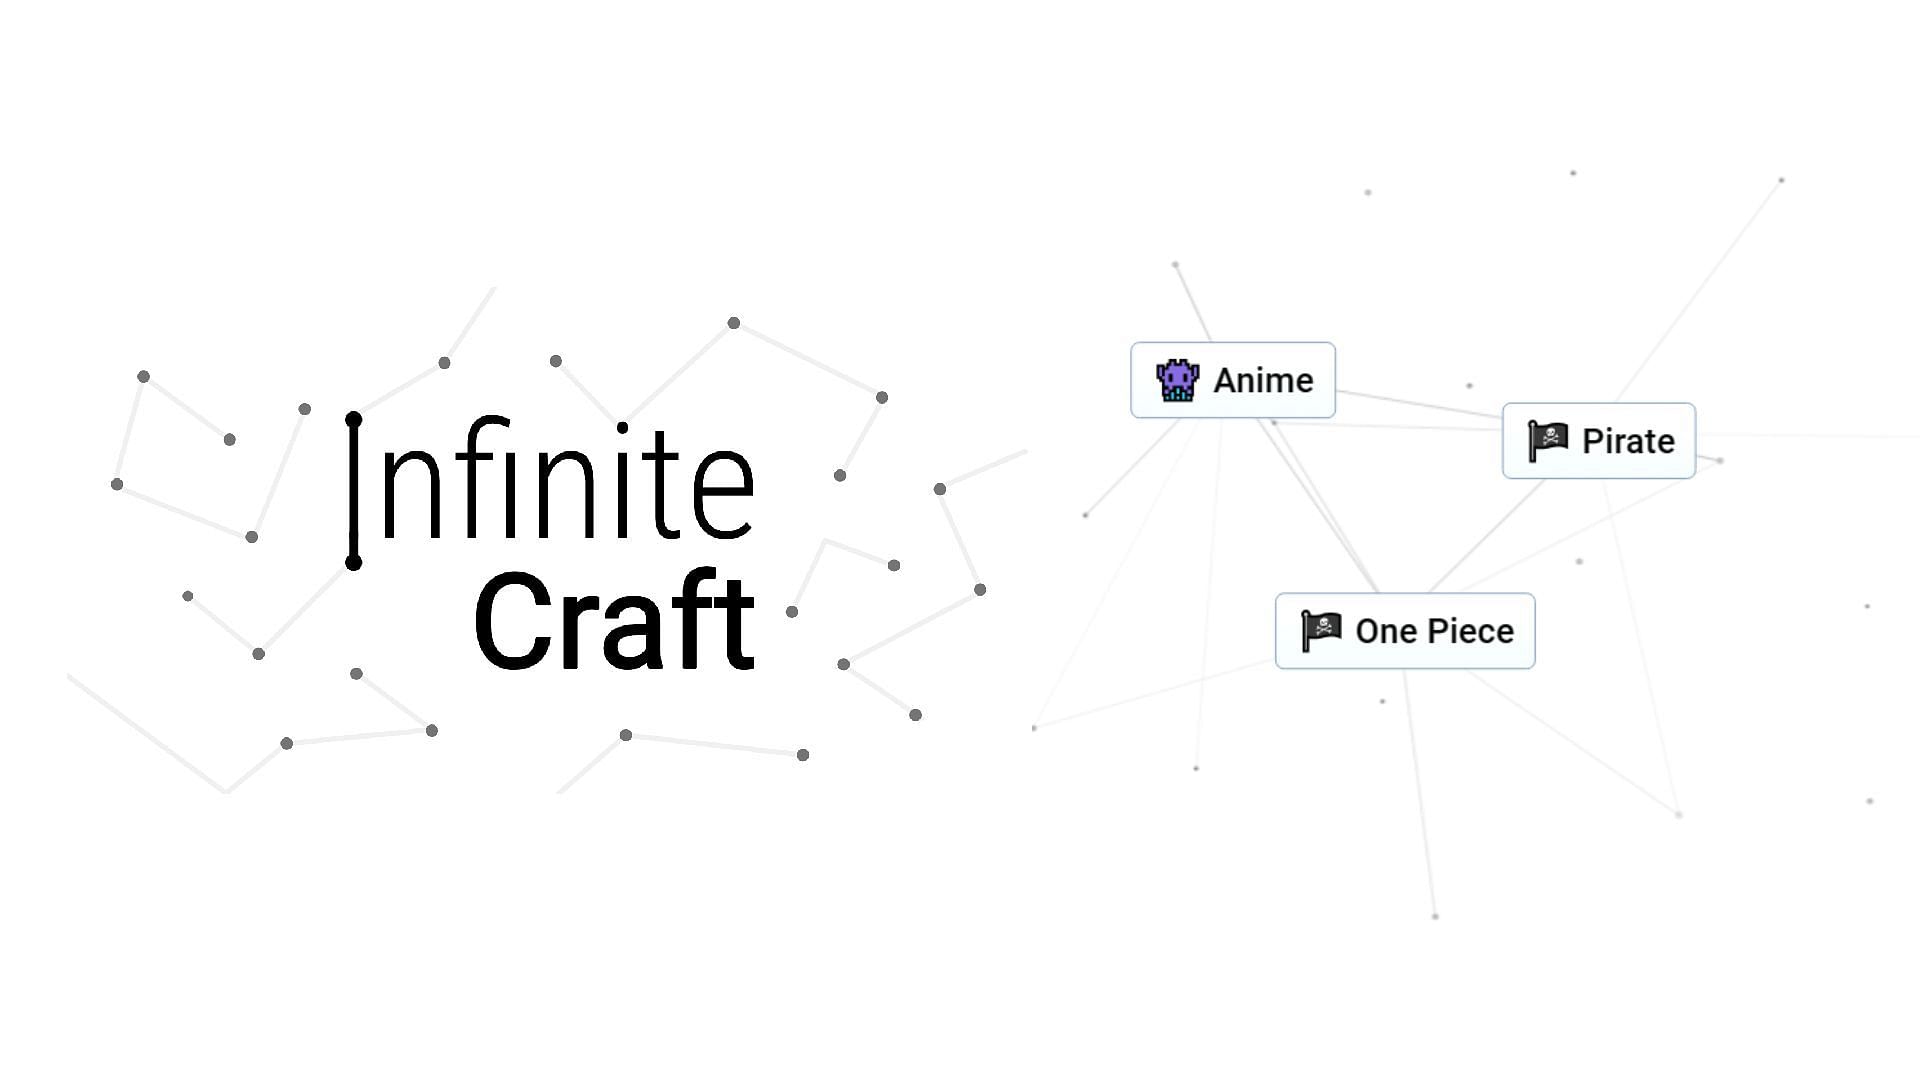 How to make One Piece in Infinite Craft (Image via neal.fun)